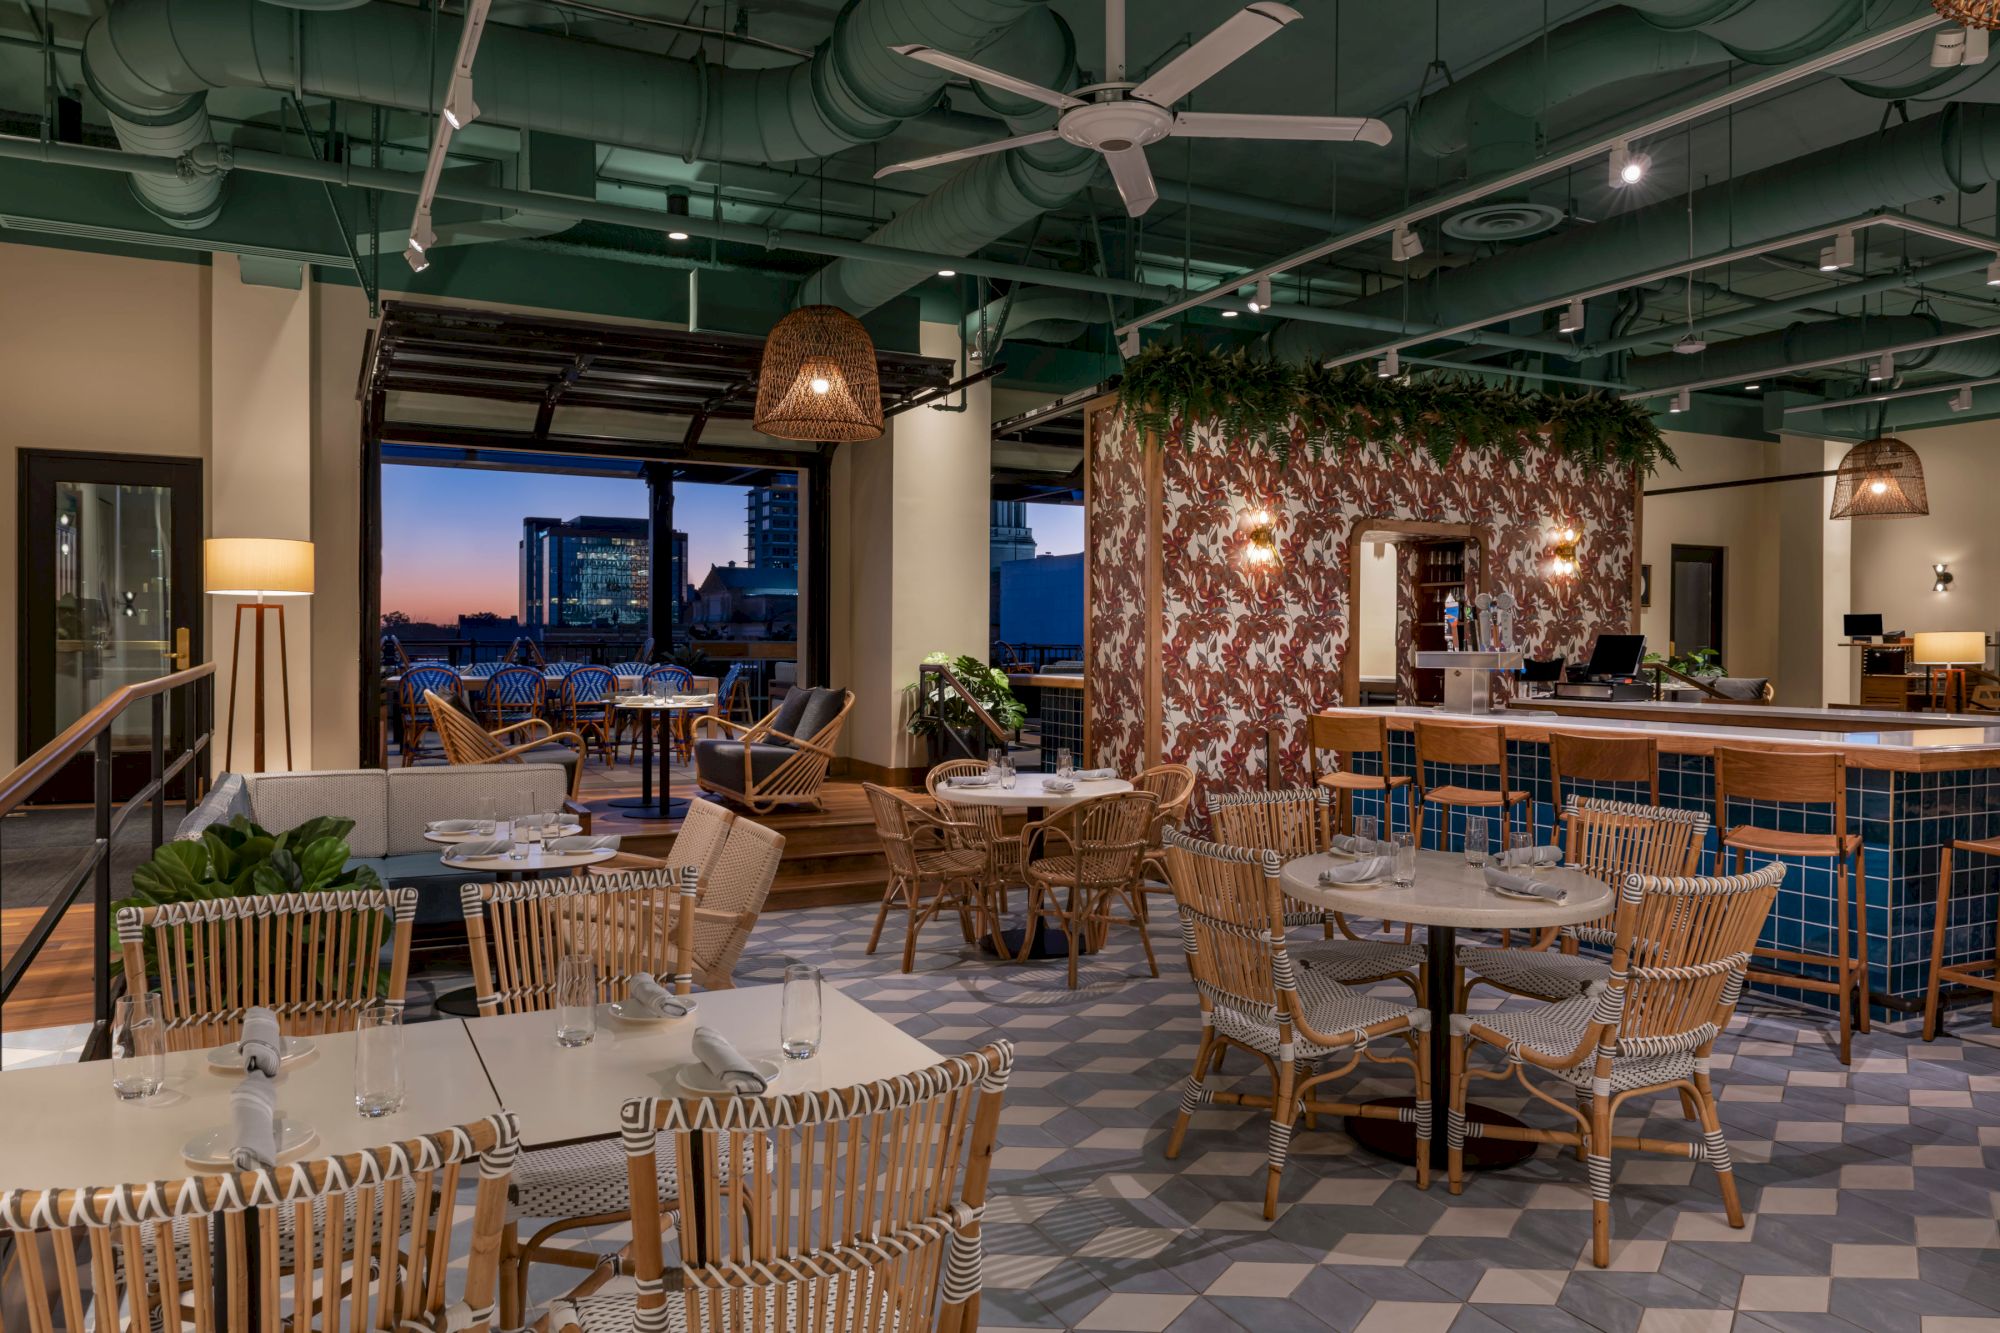 The image shows a cozy restaurant interior with wicker chairs, hanging light fixtures, and an open view of a cityscape at dusk.